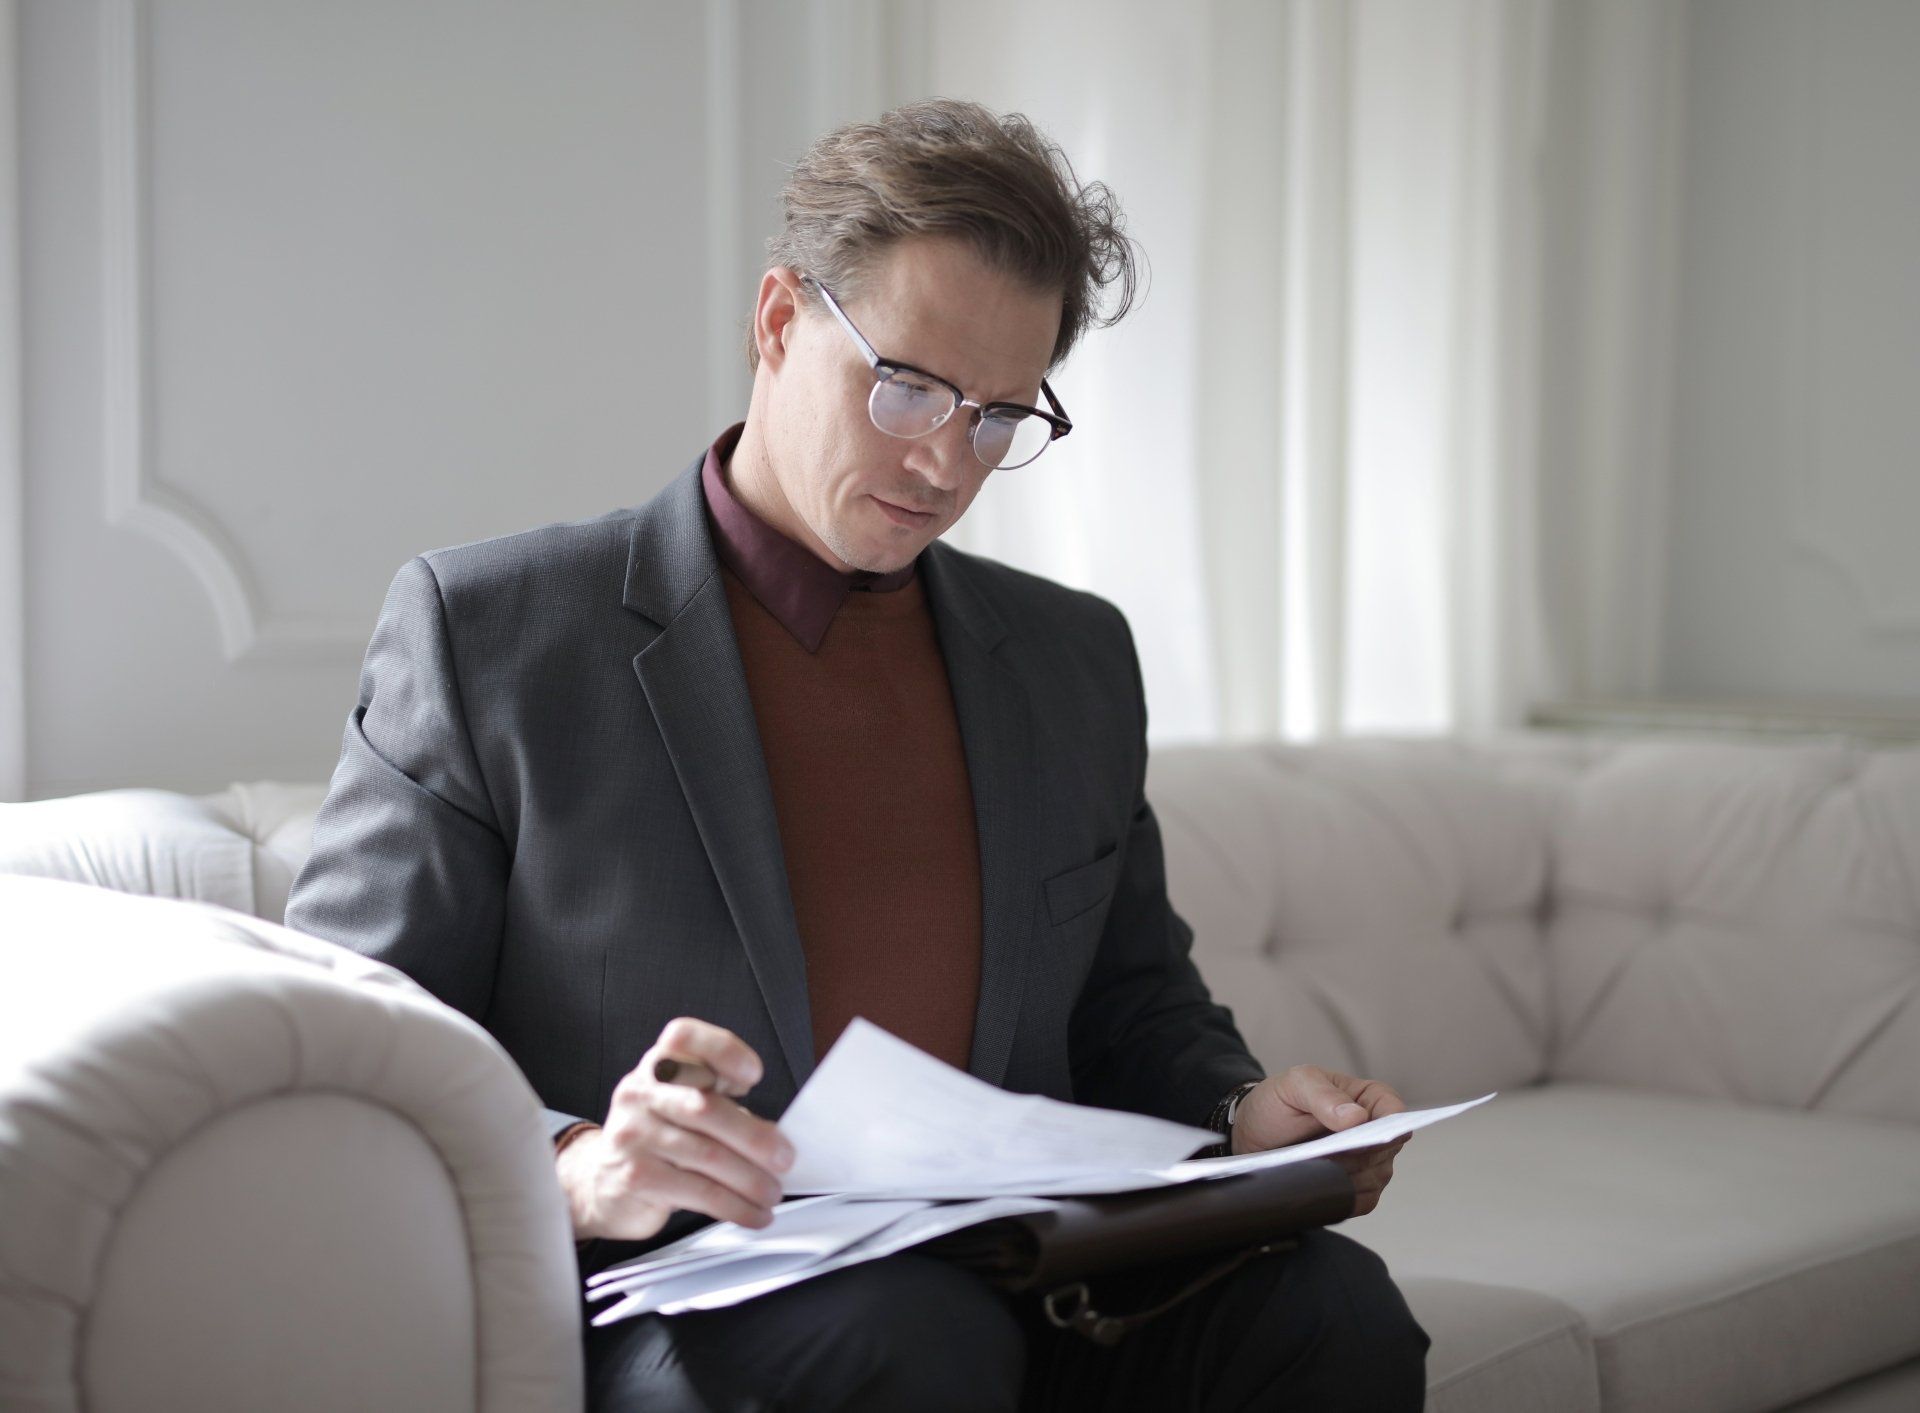 A man in a suit and glasses is sitting on a couch looking at papers.